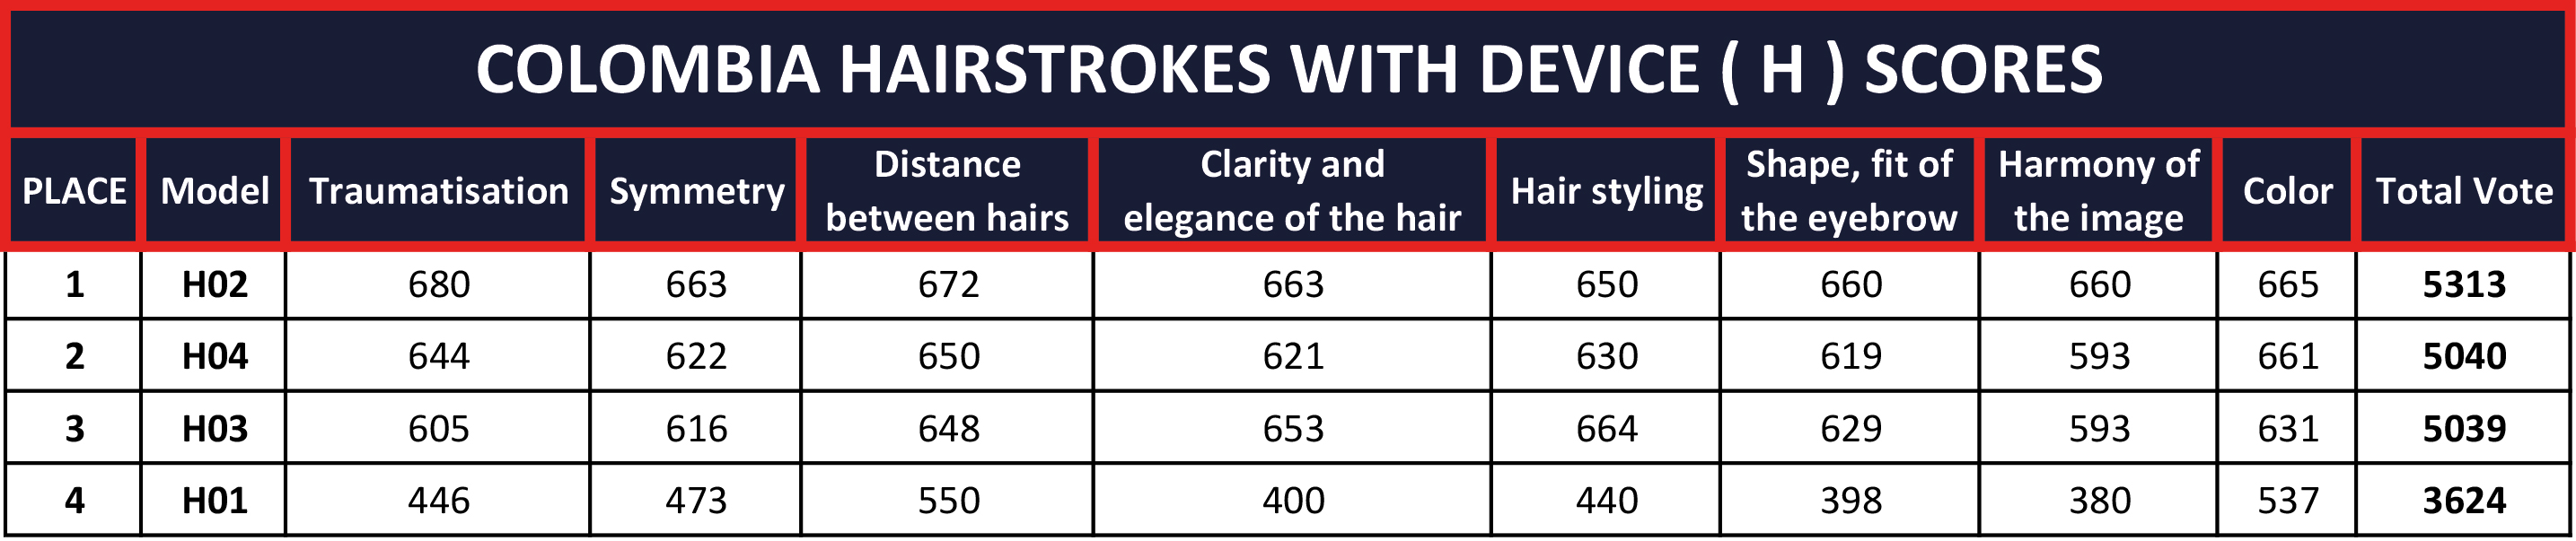 COLOMBIA-HAIRSTROKES-WITH-DEVICE-(-H-)-SCORES